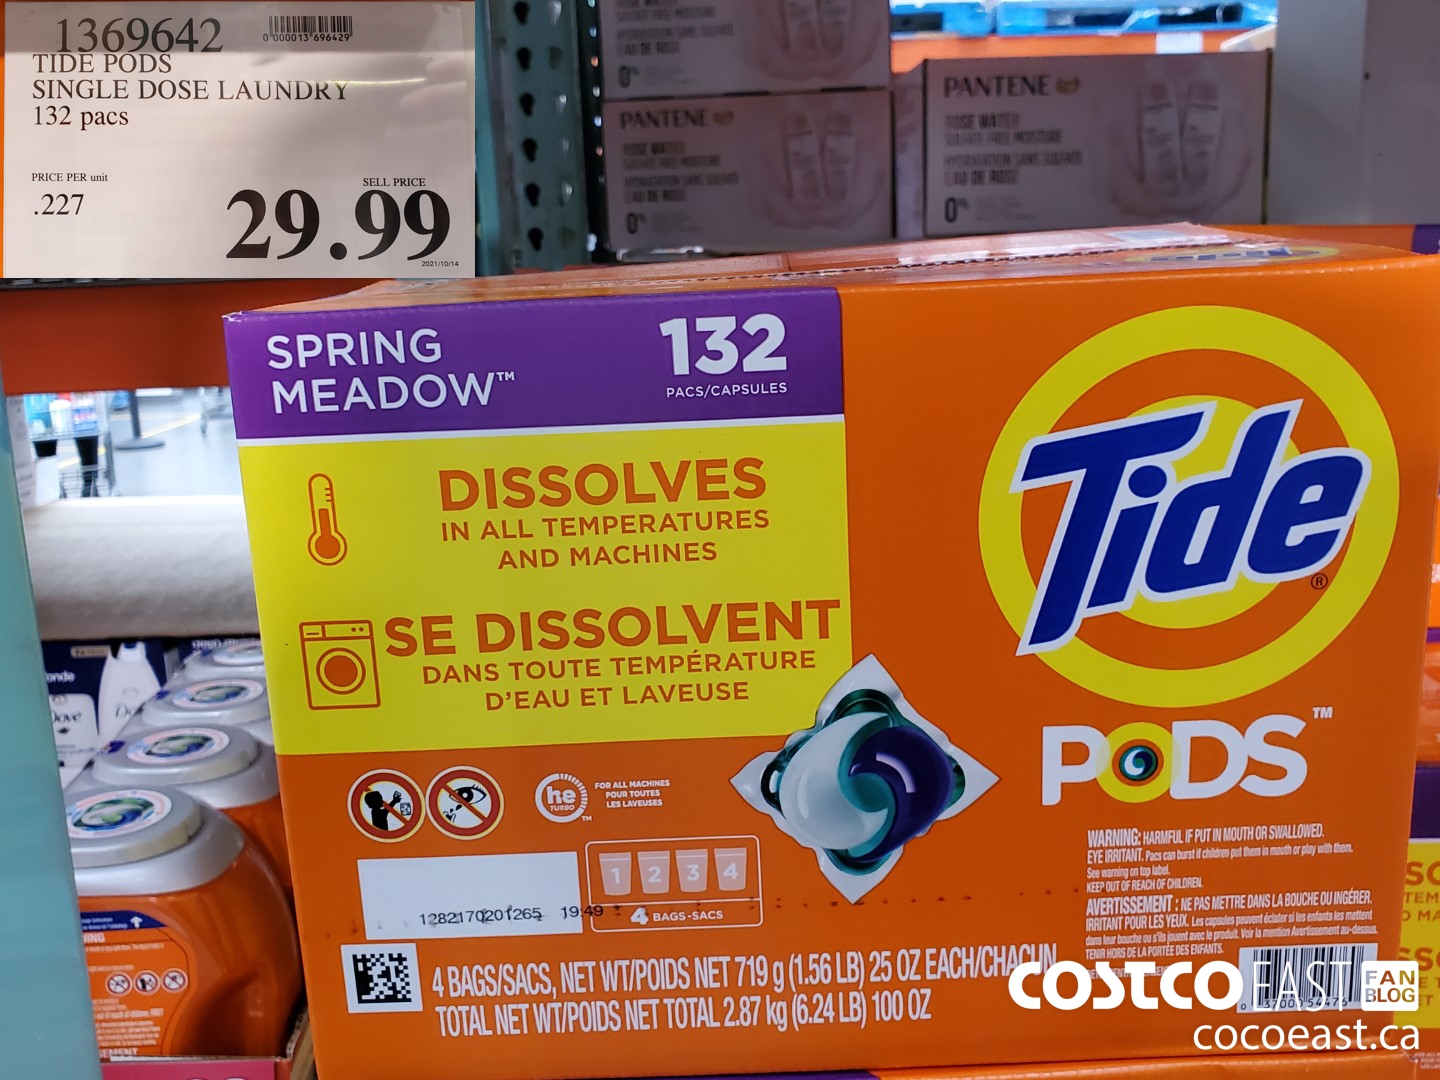 https://east.cocowest1.ca/2021/11/TIDE_PODS_SINGLE_DOSE_LAUNDRY_132_PACS_20211103_46003.jpg